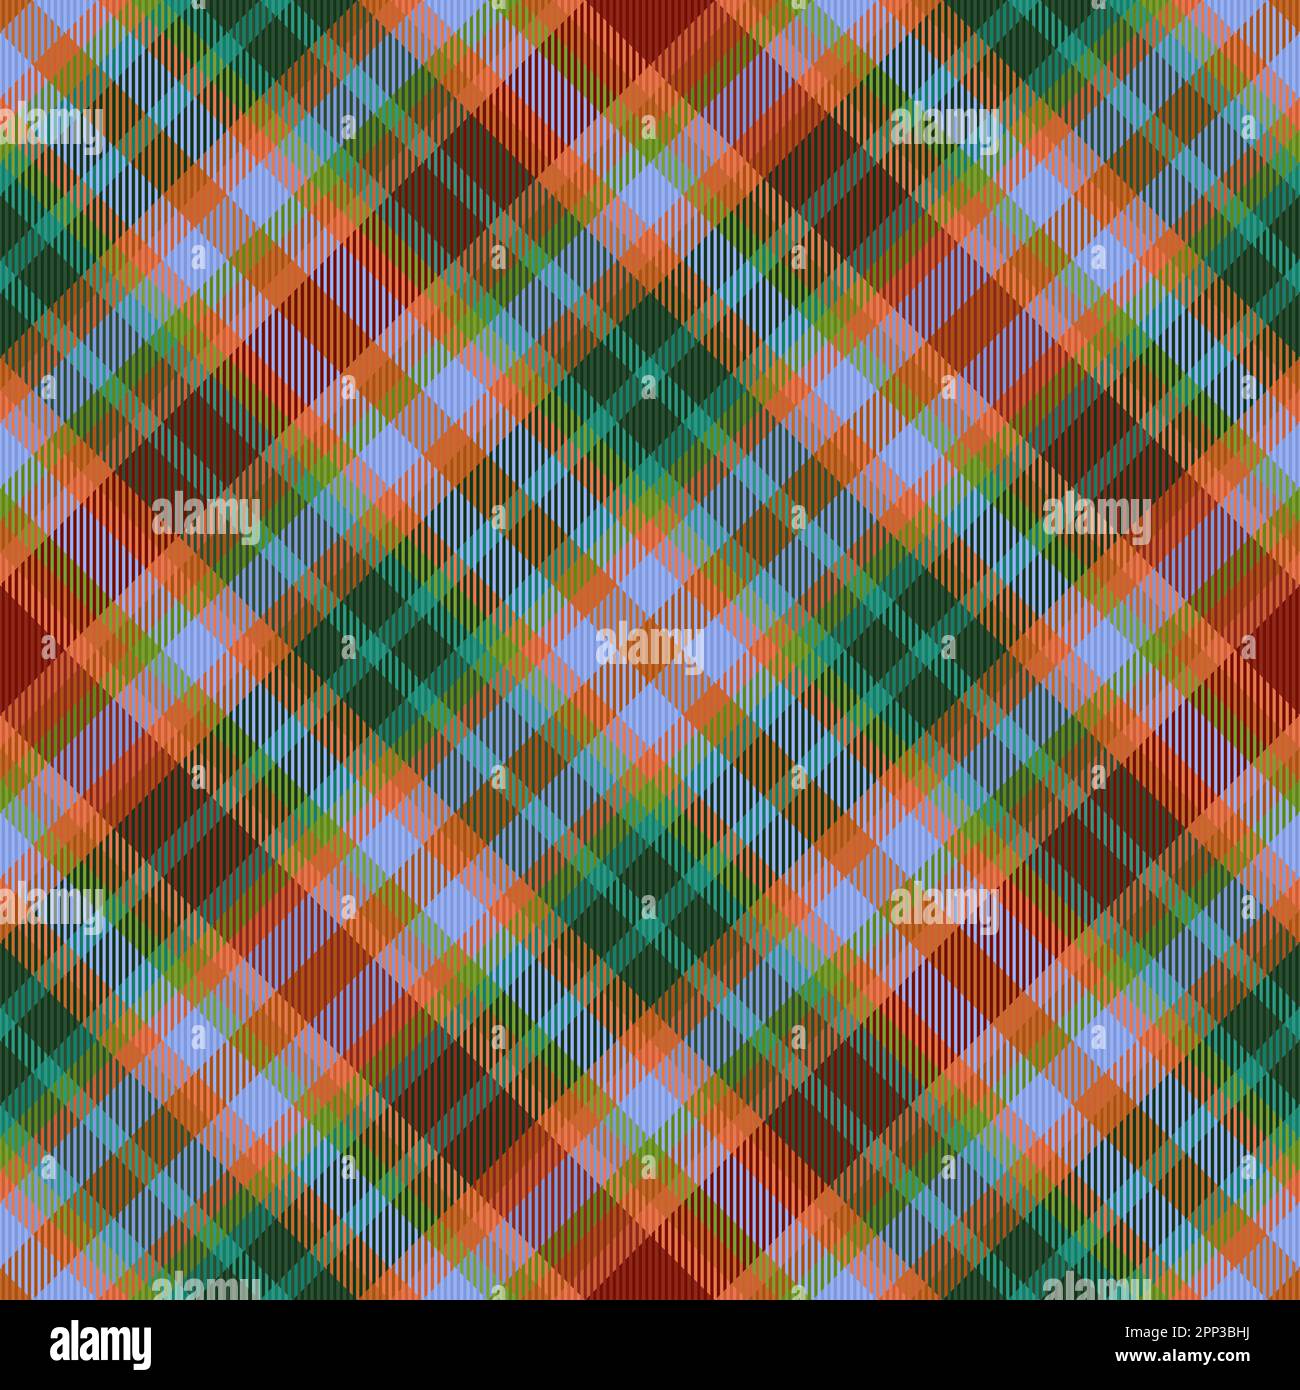 Plaid vector pattern. Tartan texture seamless. Fabric textile check background in turquoise and dark colors. Stock Vector